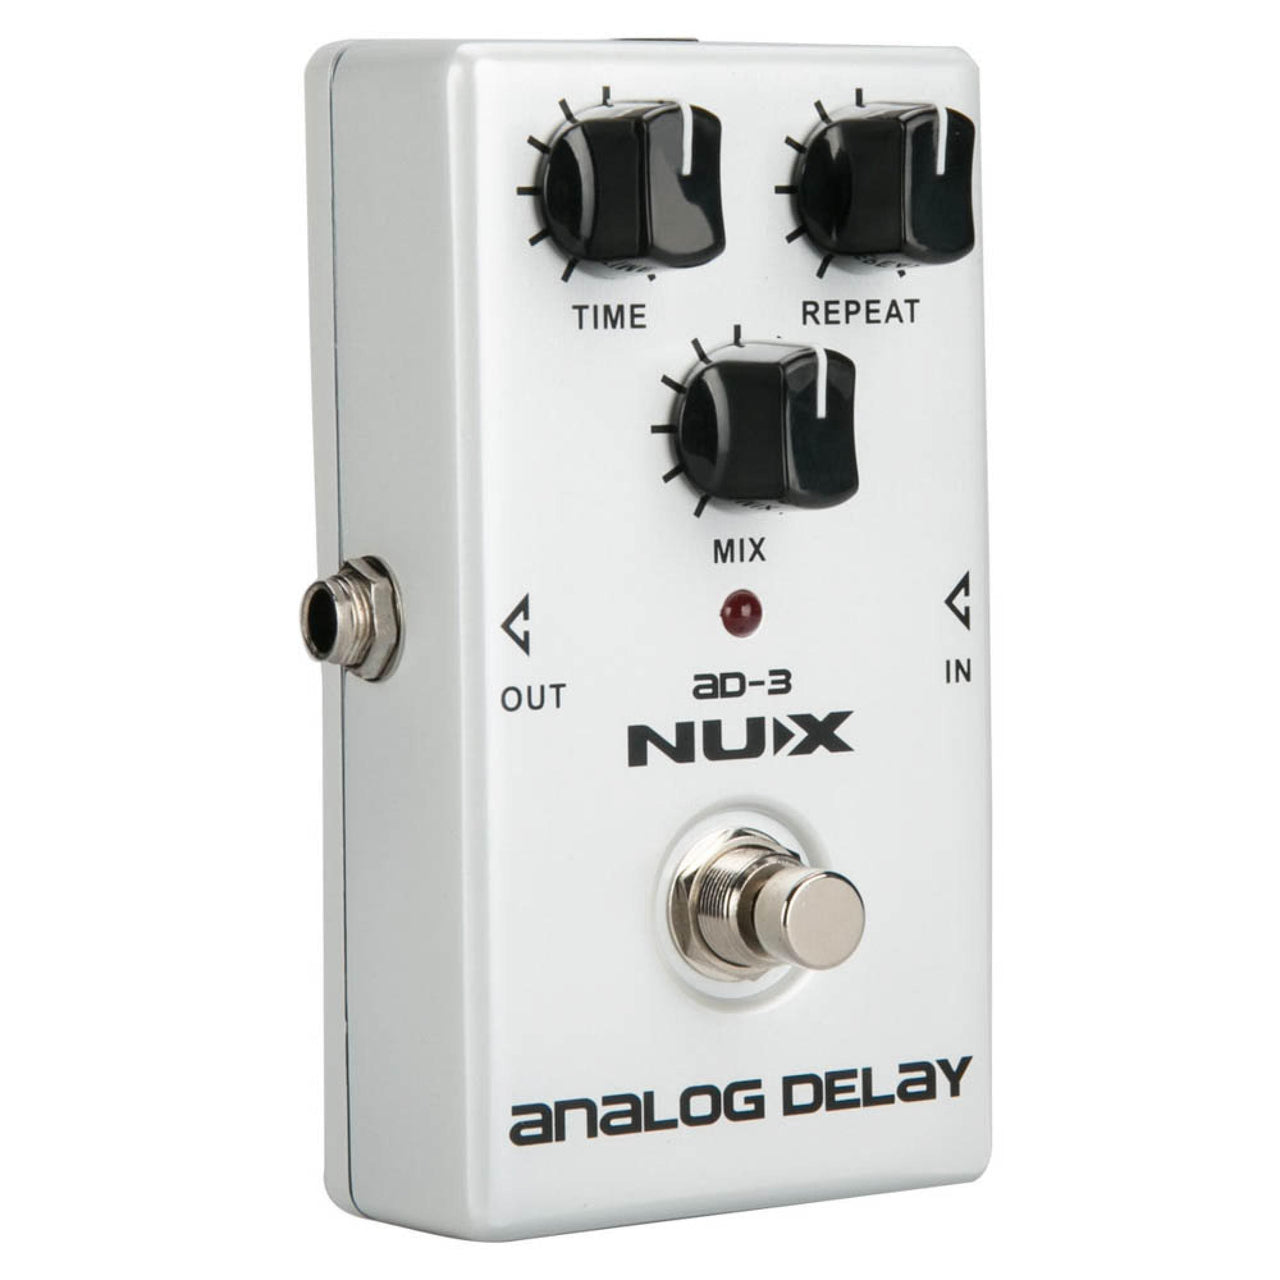 Pedal Nux Ad-3 Analog Delay